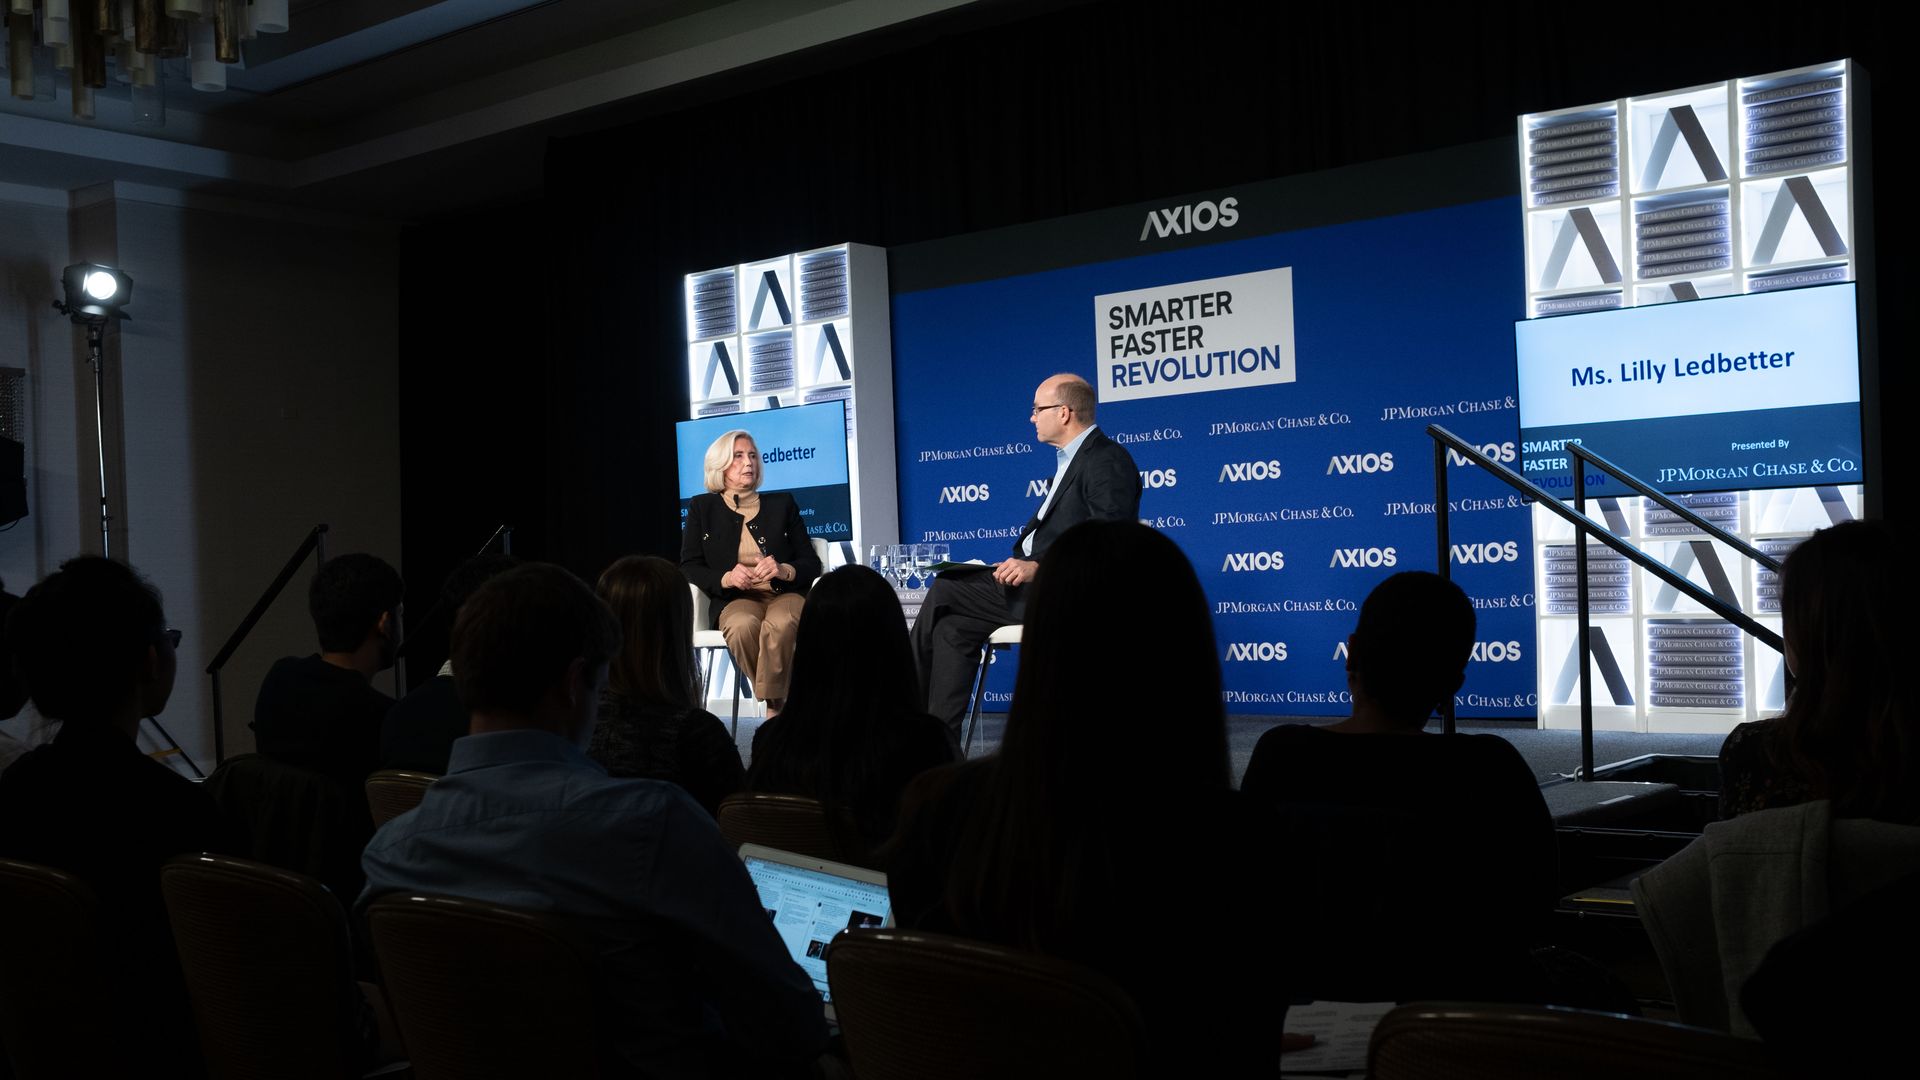 Activist Lilly Ledbetter and Axios' Mike Allen on the Axios stage